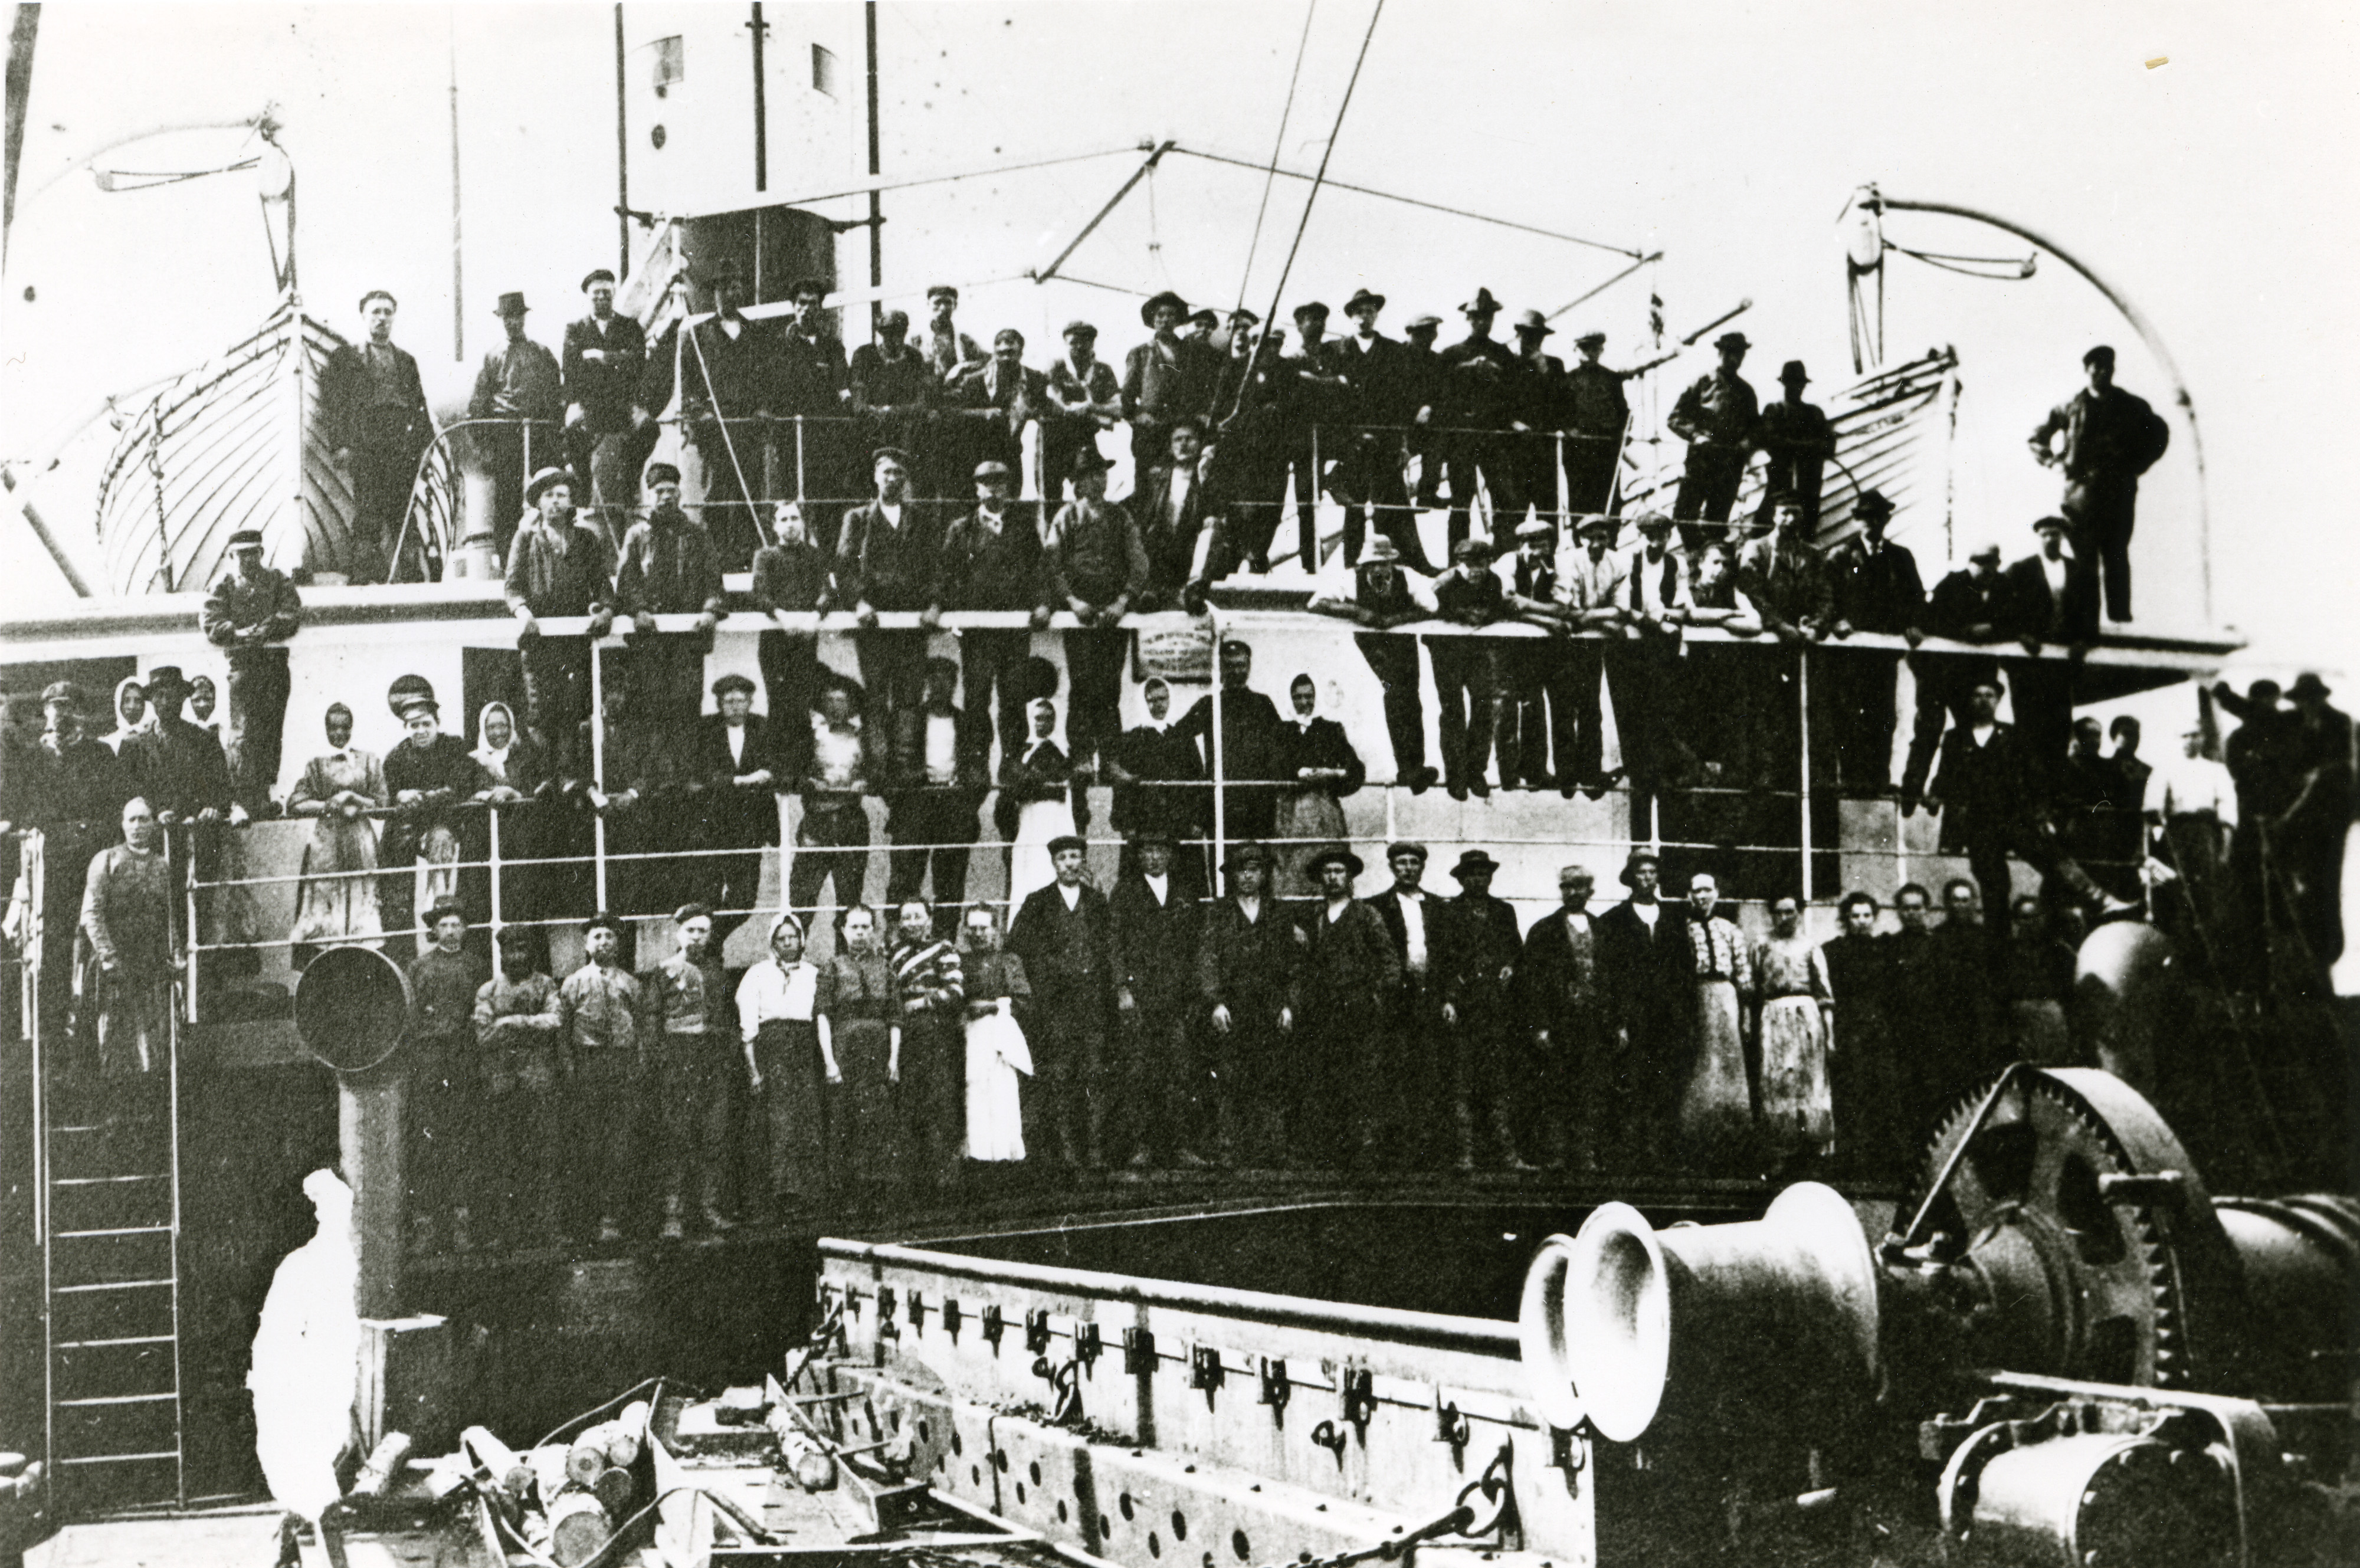 Ship and habour workers in Kaskö harbour in the 1920s.